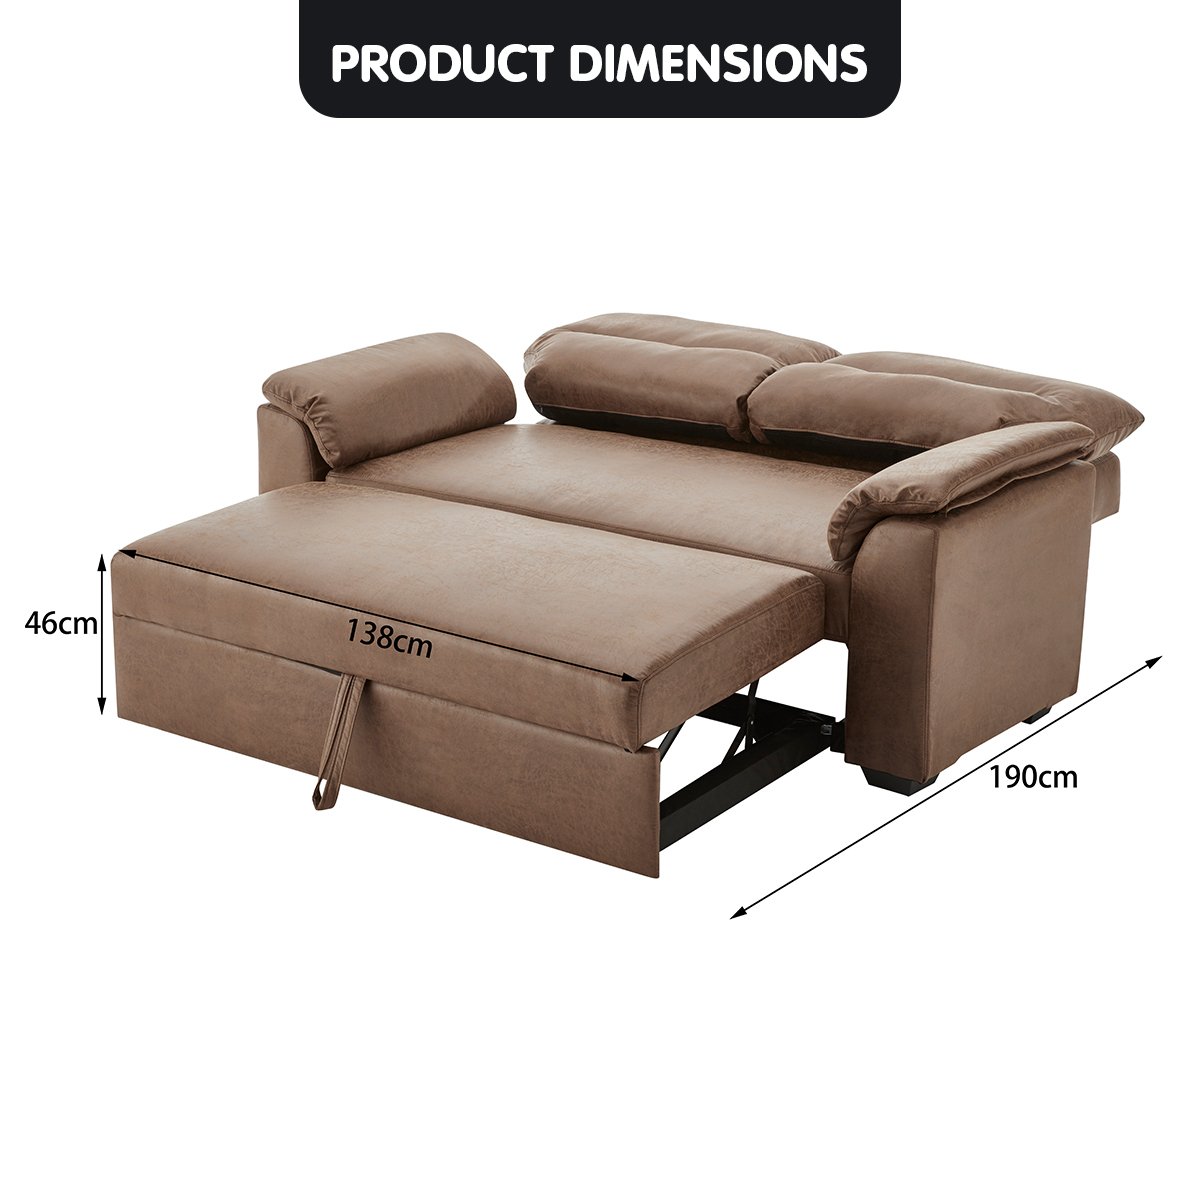 Sarantino Distressed Fabric Sofa Bed Couch Lounge - Brown